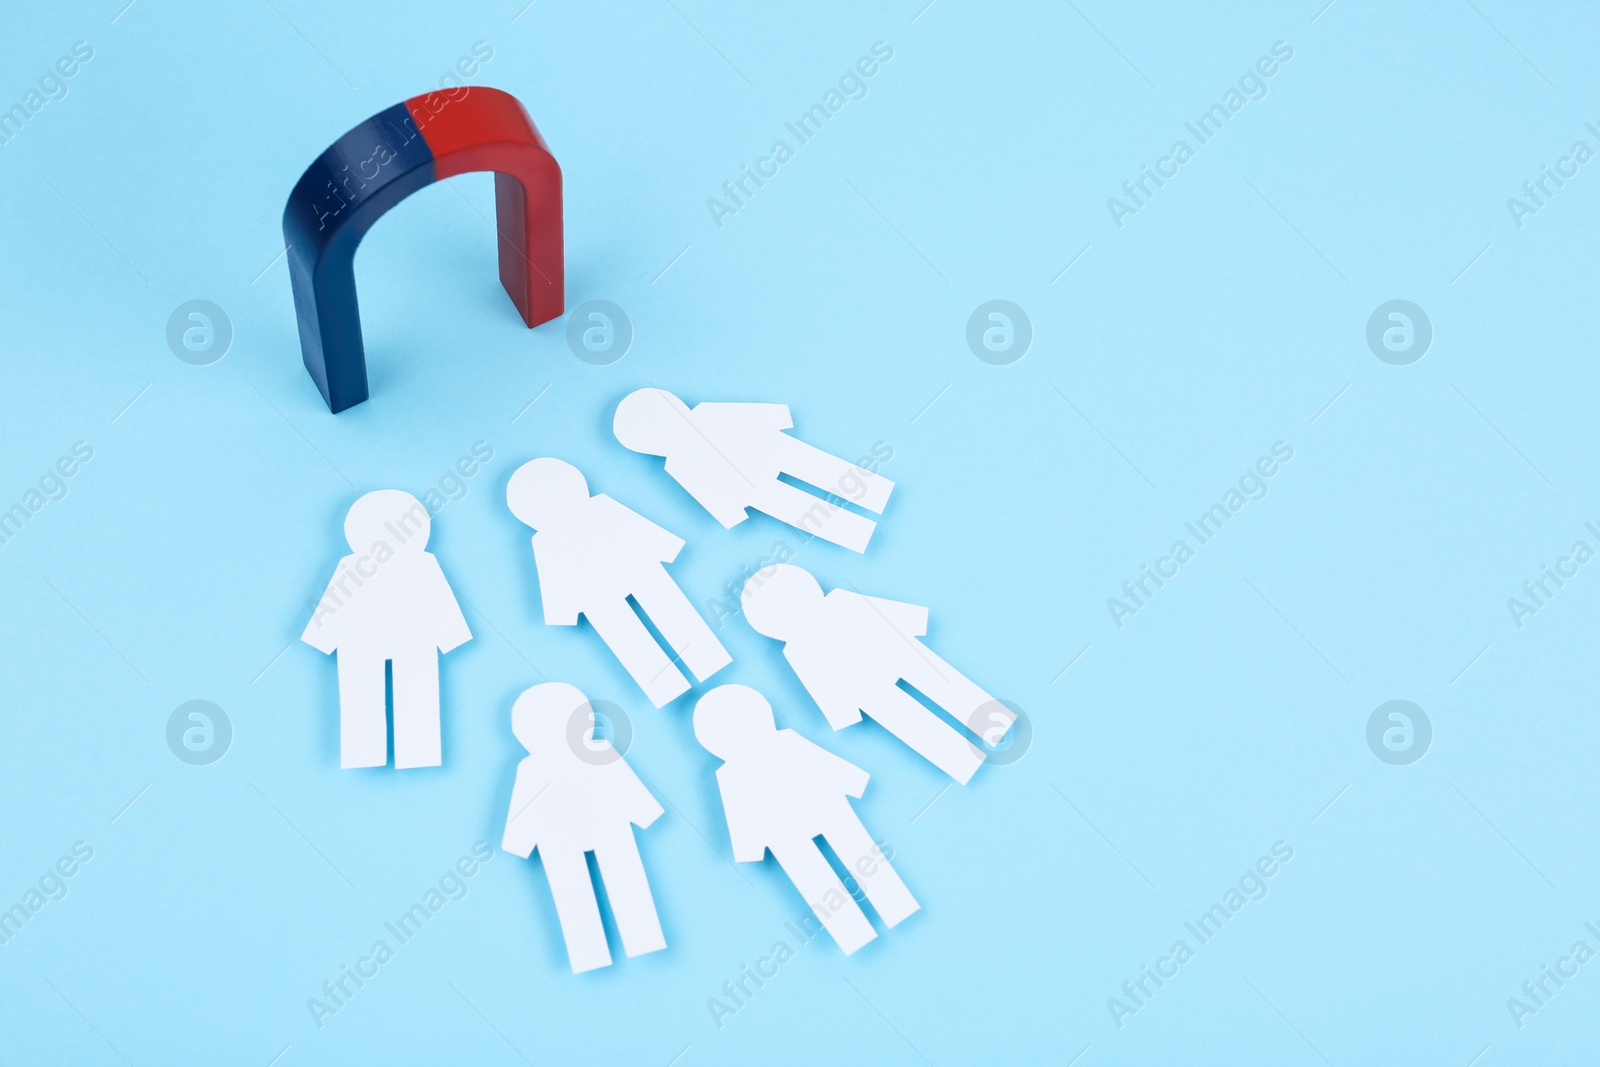 Photo of Magnet attracting paper people on light blue background